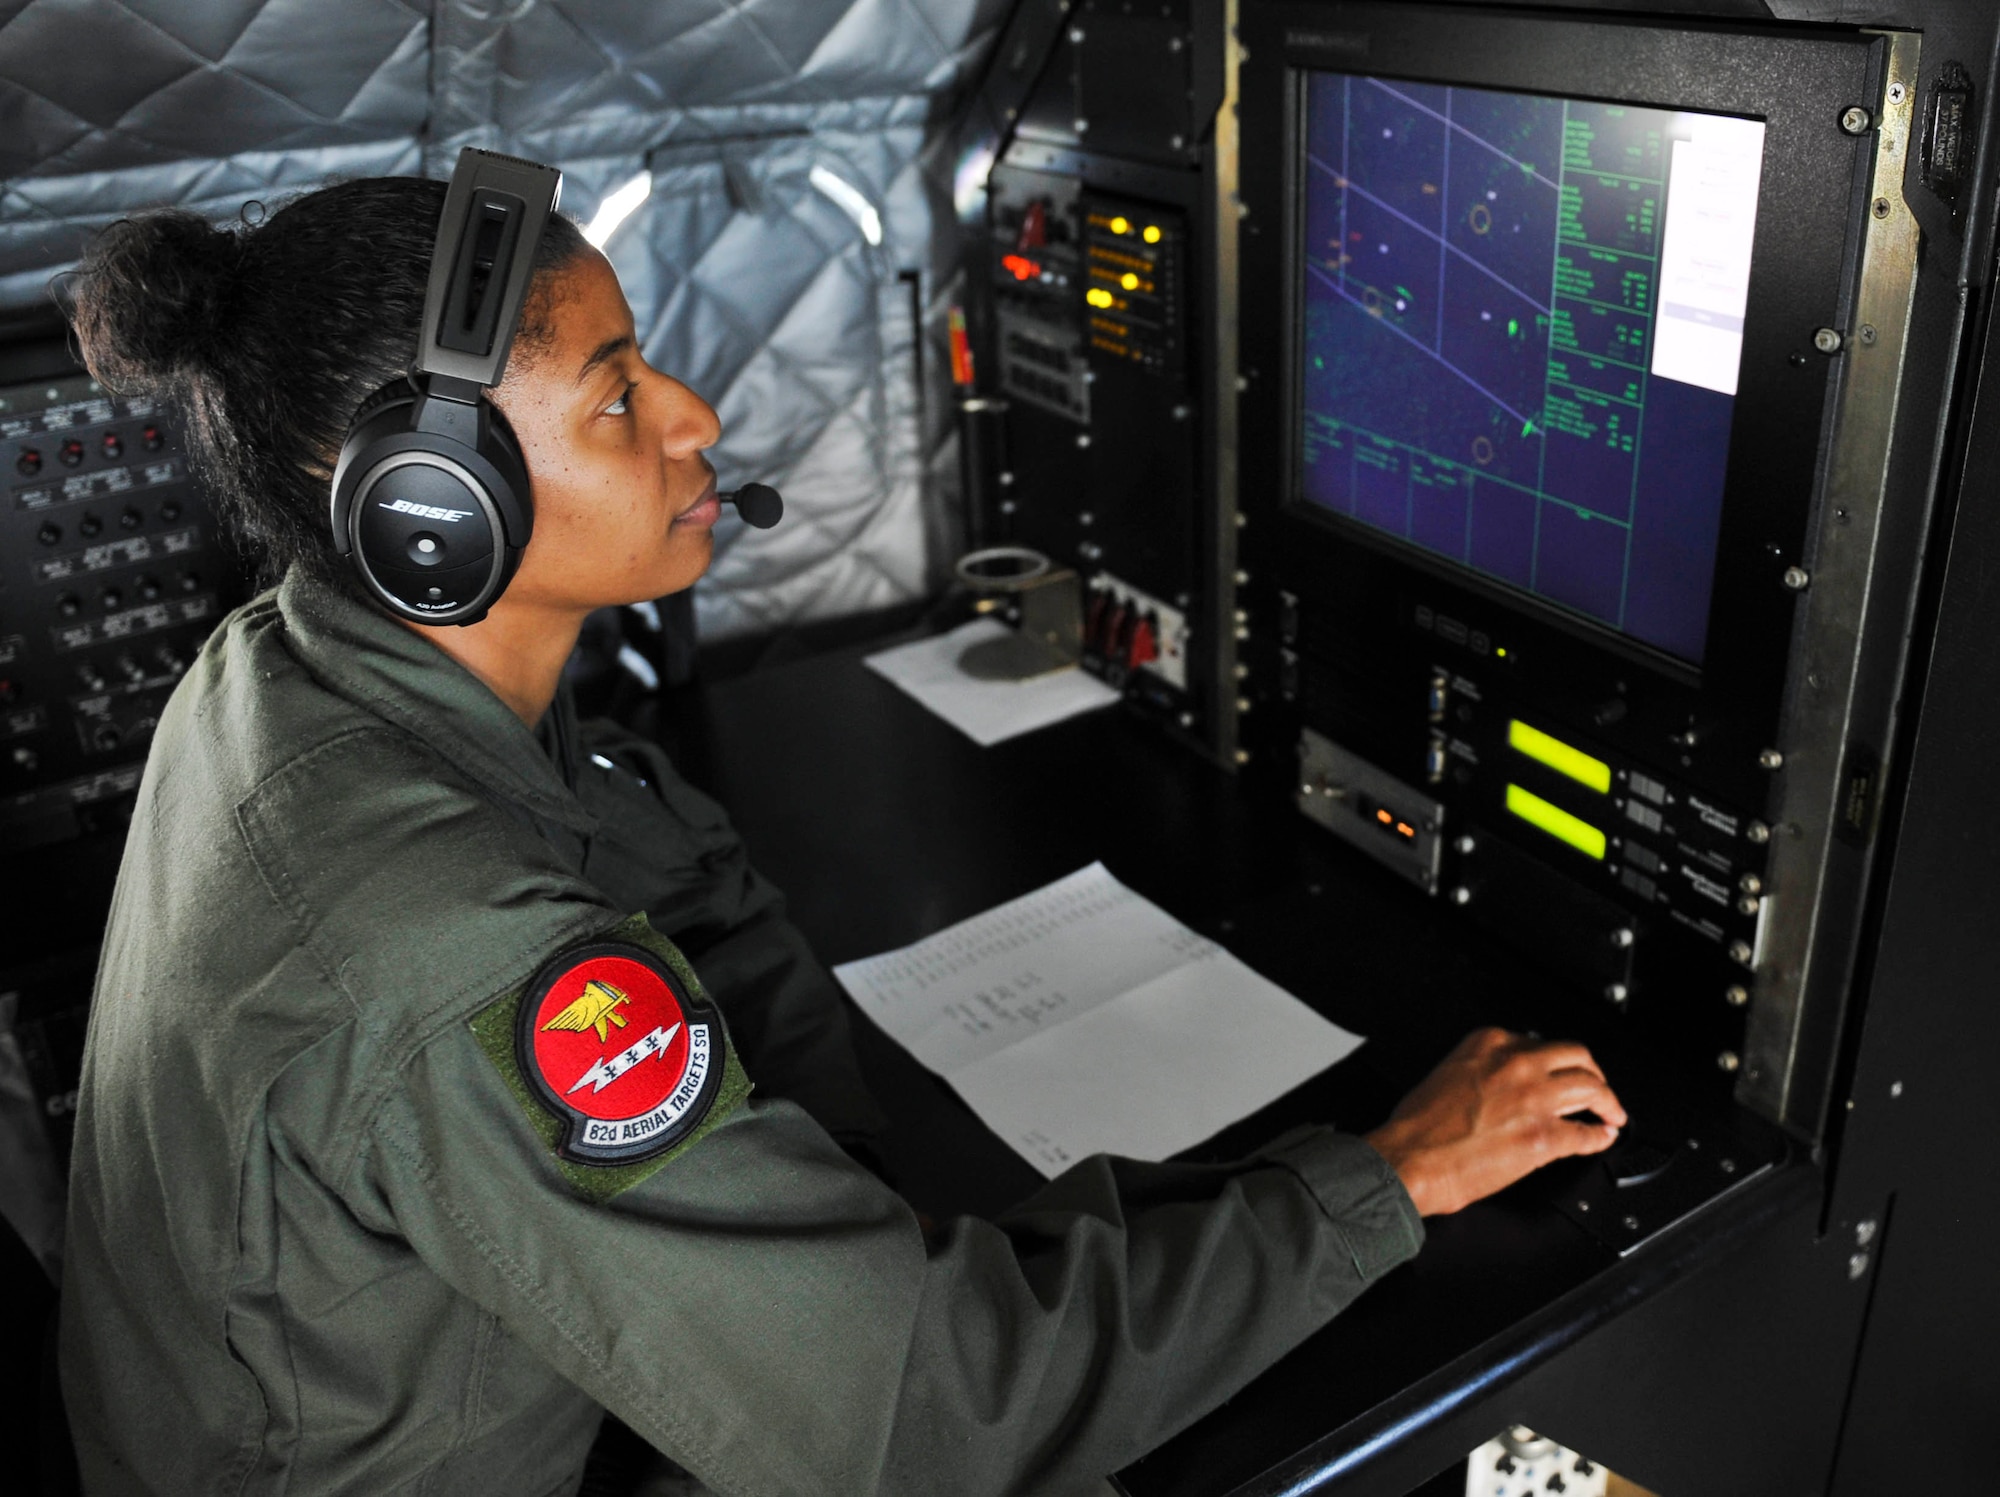 Technical Sgt. Latisha Russell, 82nd Aerial Target Squadron airborne mission systems operator, monitors the sea surveillance radar on the E-9A Widget, May 19. The Widget sweeps the Gulf of Mexico, gathers data, and sends it to the range safety officer, allowing him to build the shoot pattern to safely test weapons during a Weapons System Evaluation Program. (U.S. Air Force photo by Senior Airman Dustin Mullen/Released)